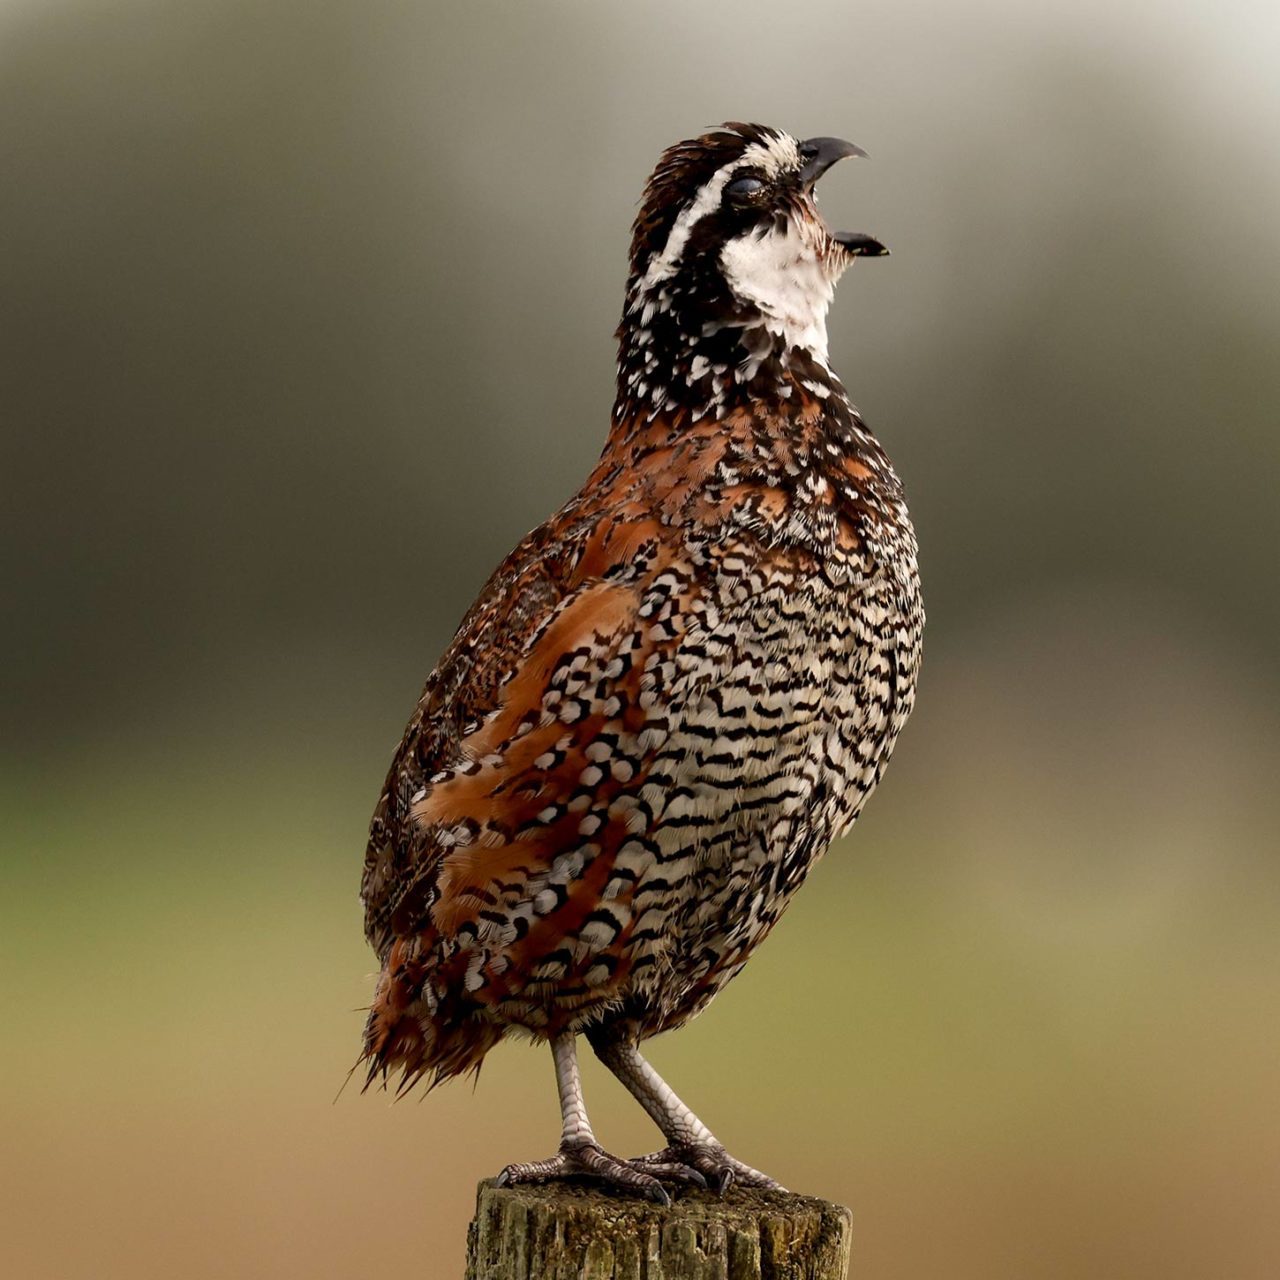 closeup of a tubby brown-and-black quail (Northern Bobwhite) standing on a fencepost with its beak wide open.